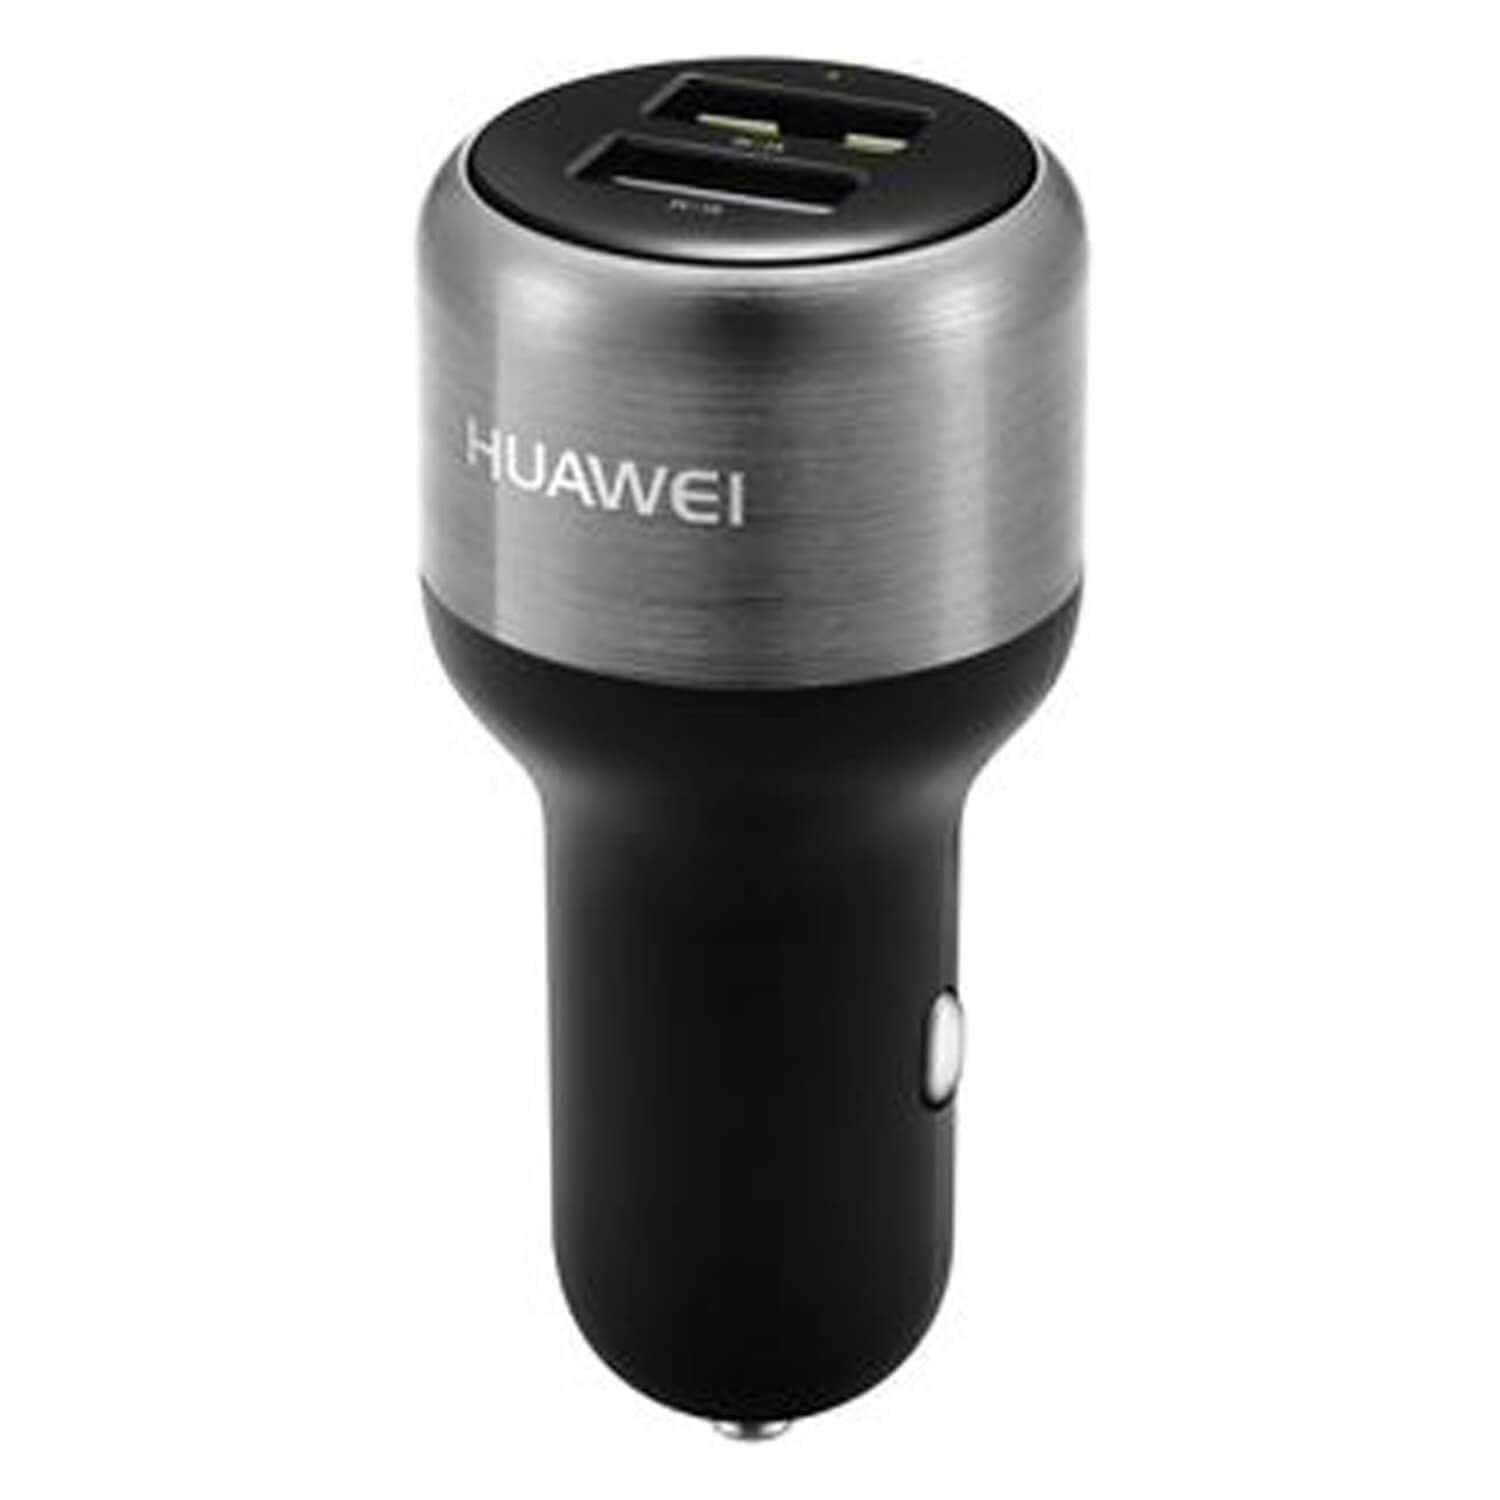 HUAWEI QuickCharge™ Car Charger